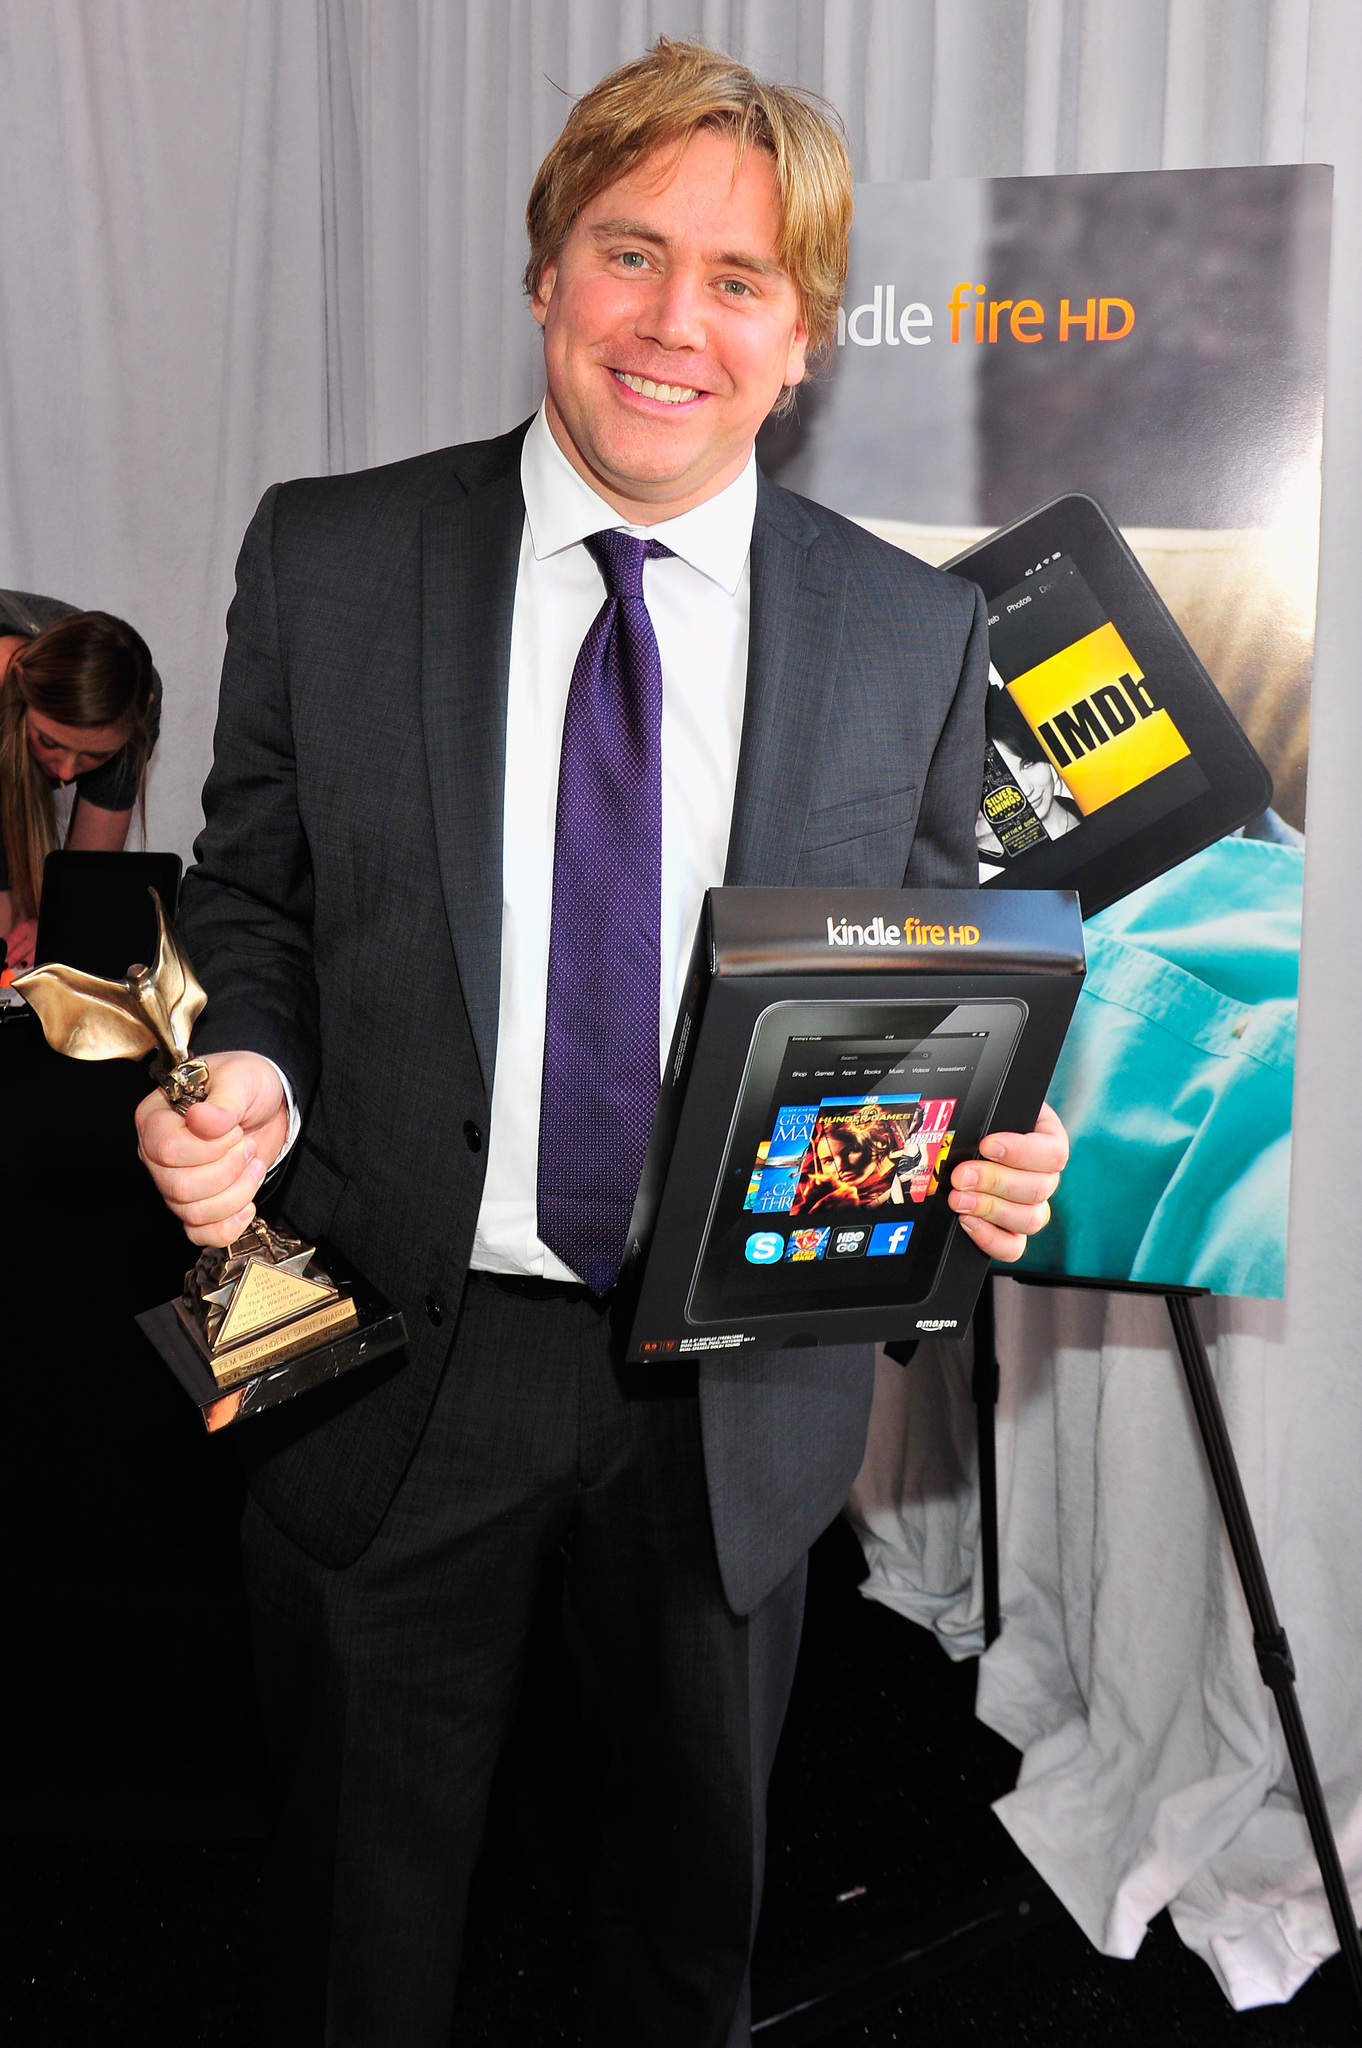 Stephen Chbosky poses in the Kindle Fire HD and IMDb Green Room during the 2013 Film Independent Spirit Awards at Santa Monica Beach on February 23, 2013 in Santa Monica, California.